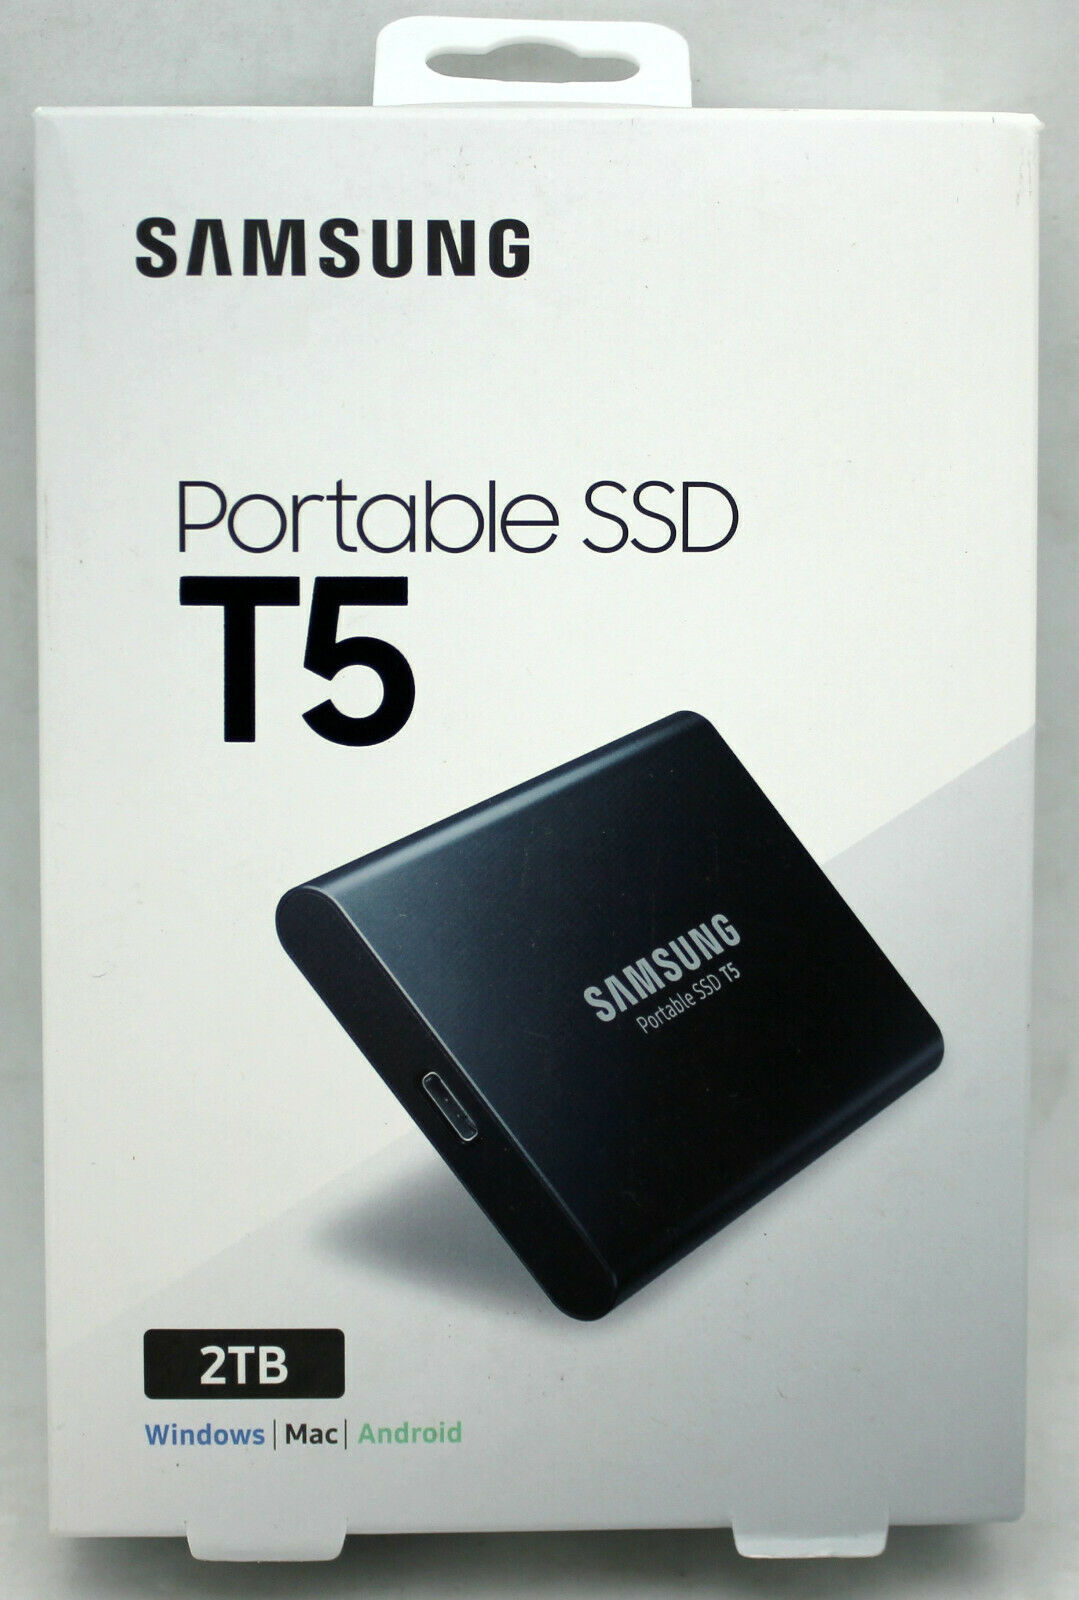 Samsung MU-2T0BW 2TB USB 3.1 Gen 2 Portable SSD  with both USB Type A and Type C cables, Read and Write Speed up to 540 MB/s